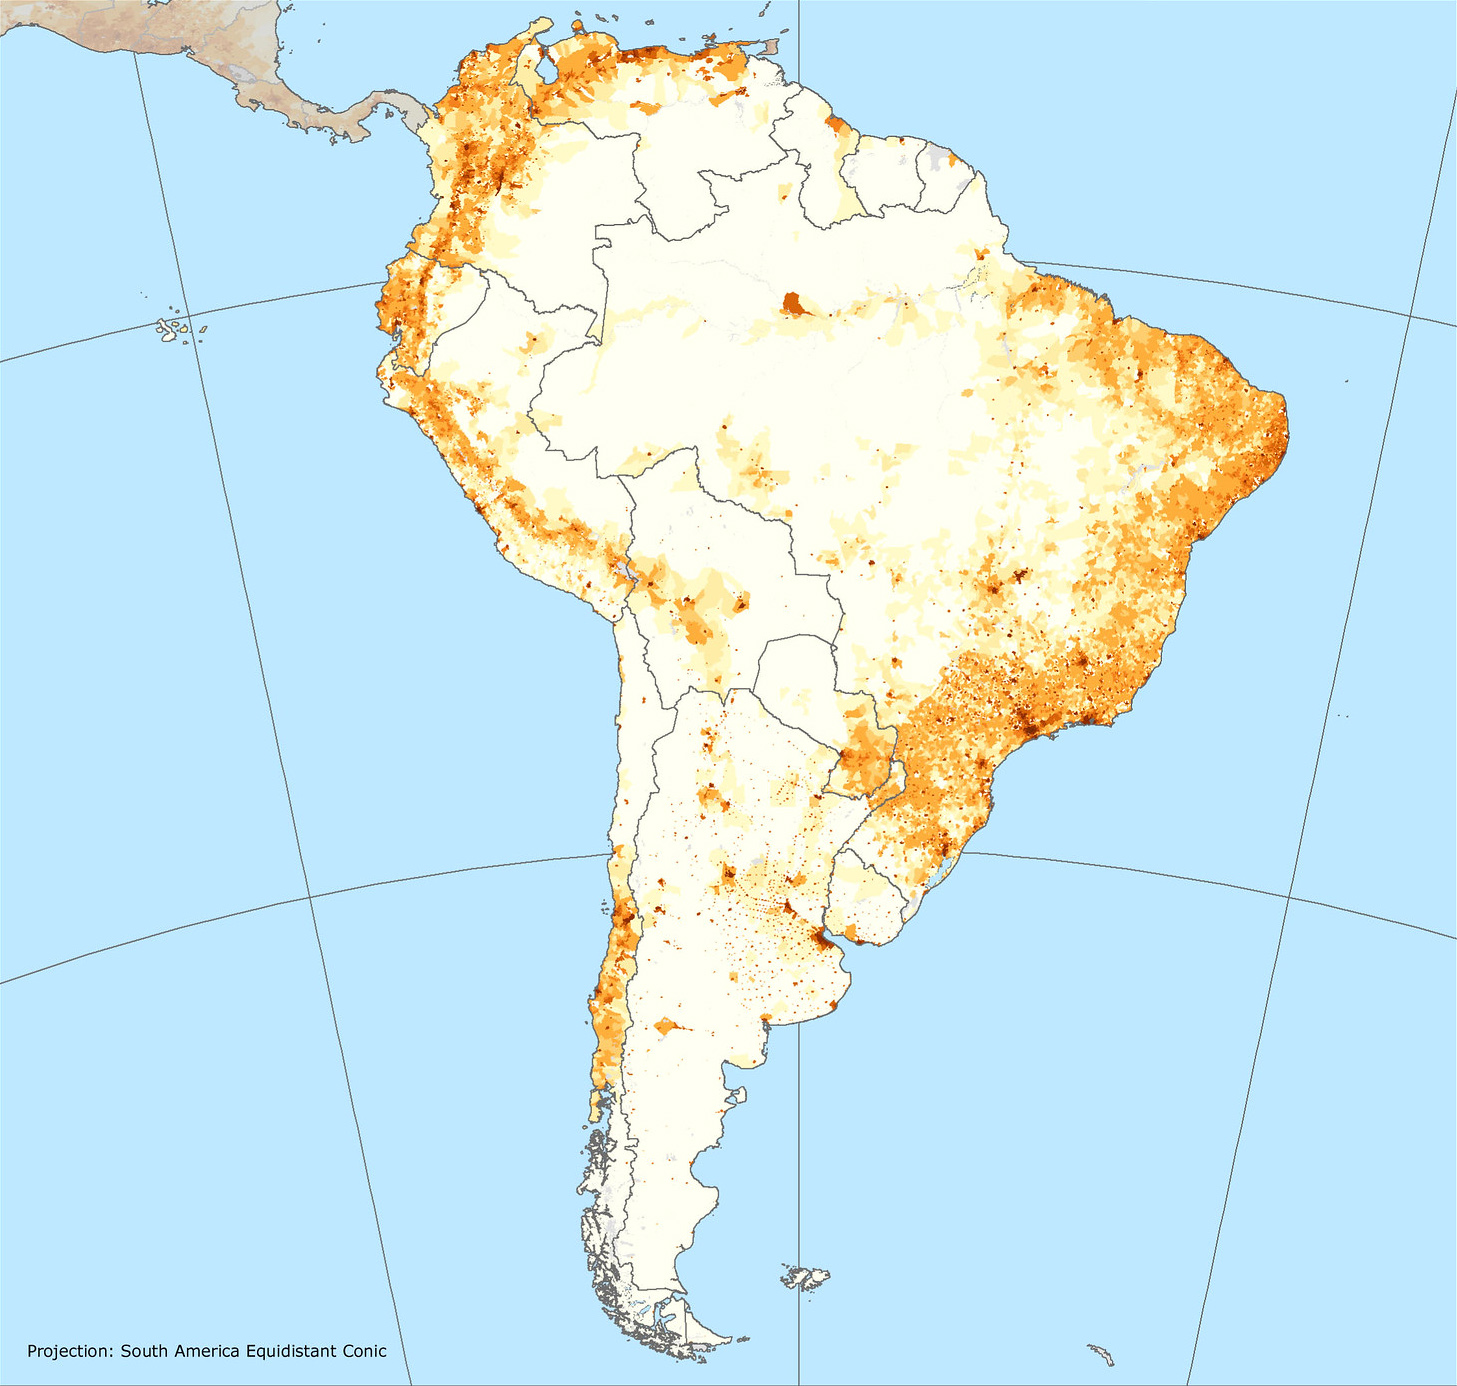 continent-quiz-15-geography-questions-about-south-america-1-population